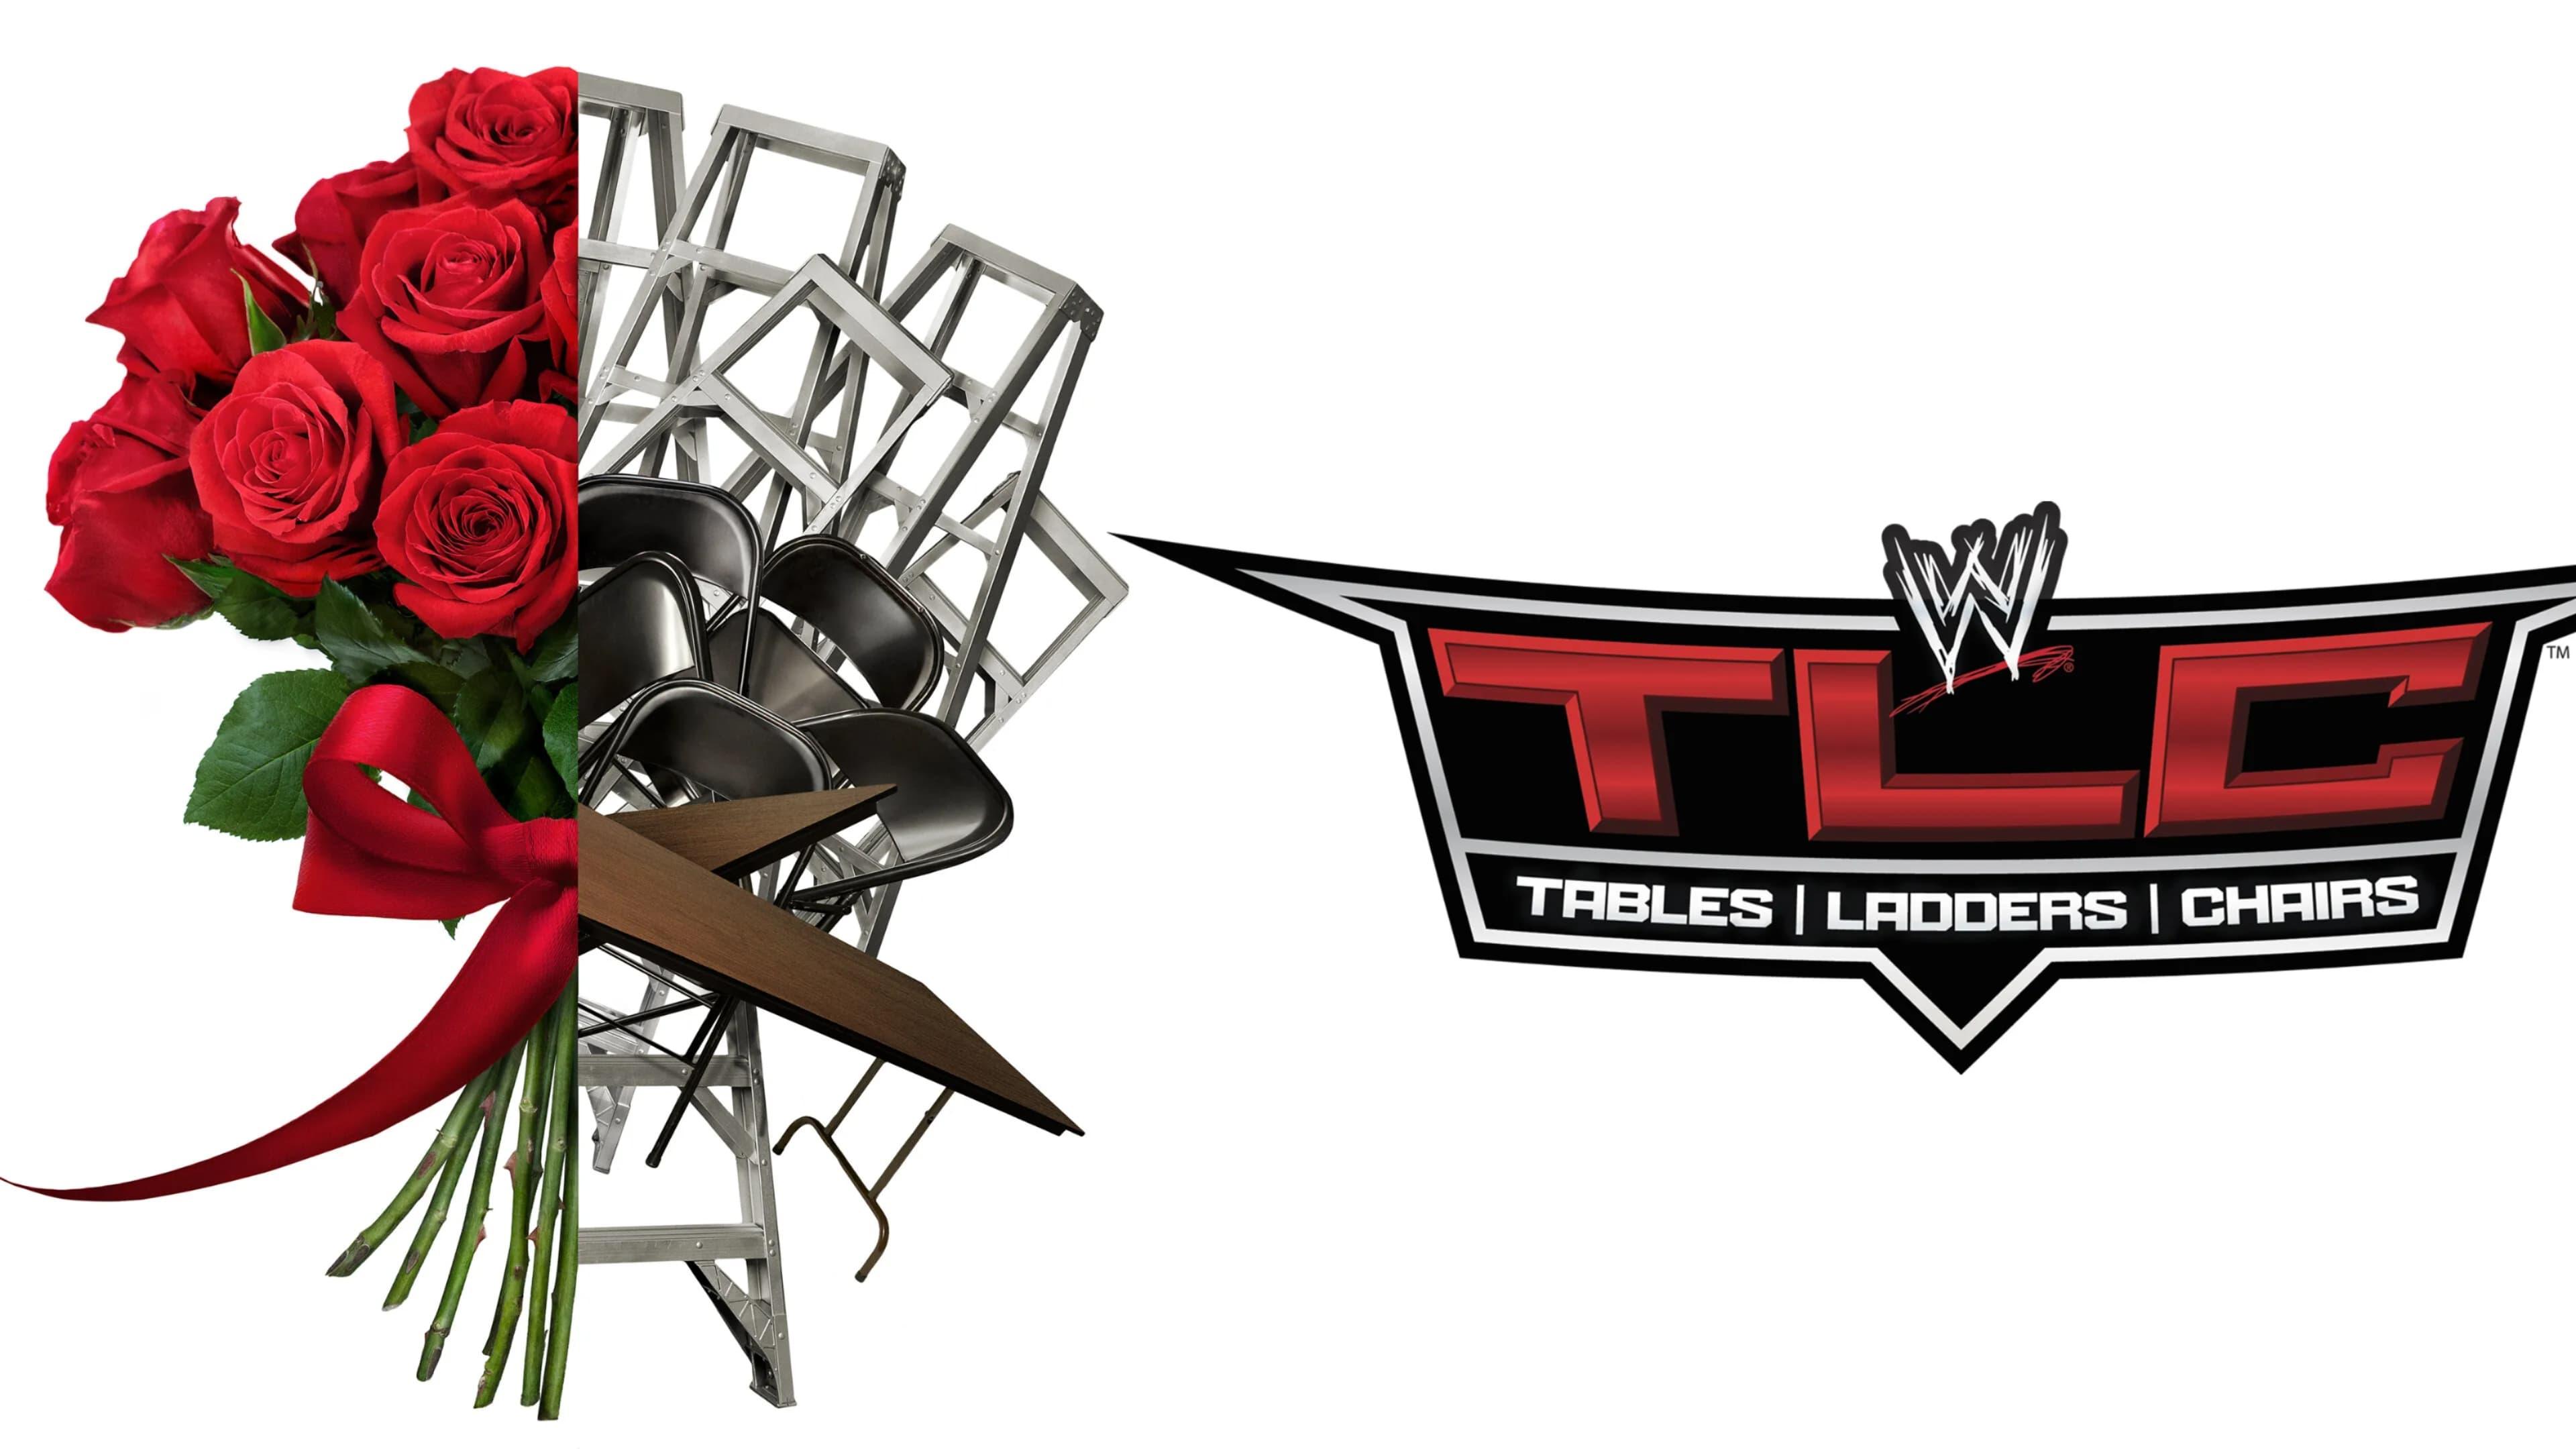 WWE TLC: Tables, Ladders & Chairs 2013 backdrop